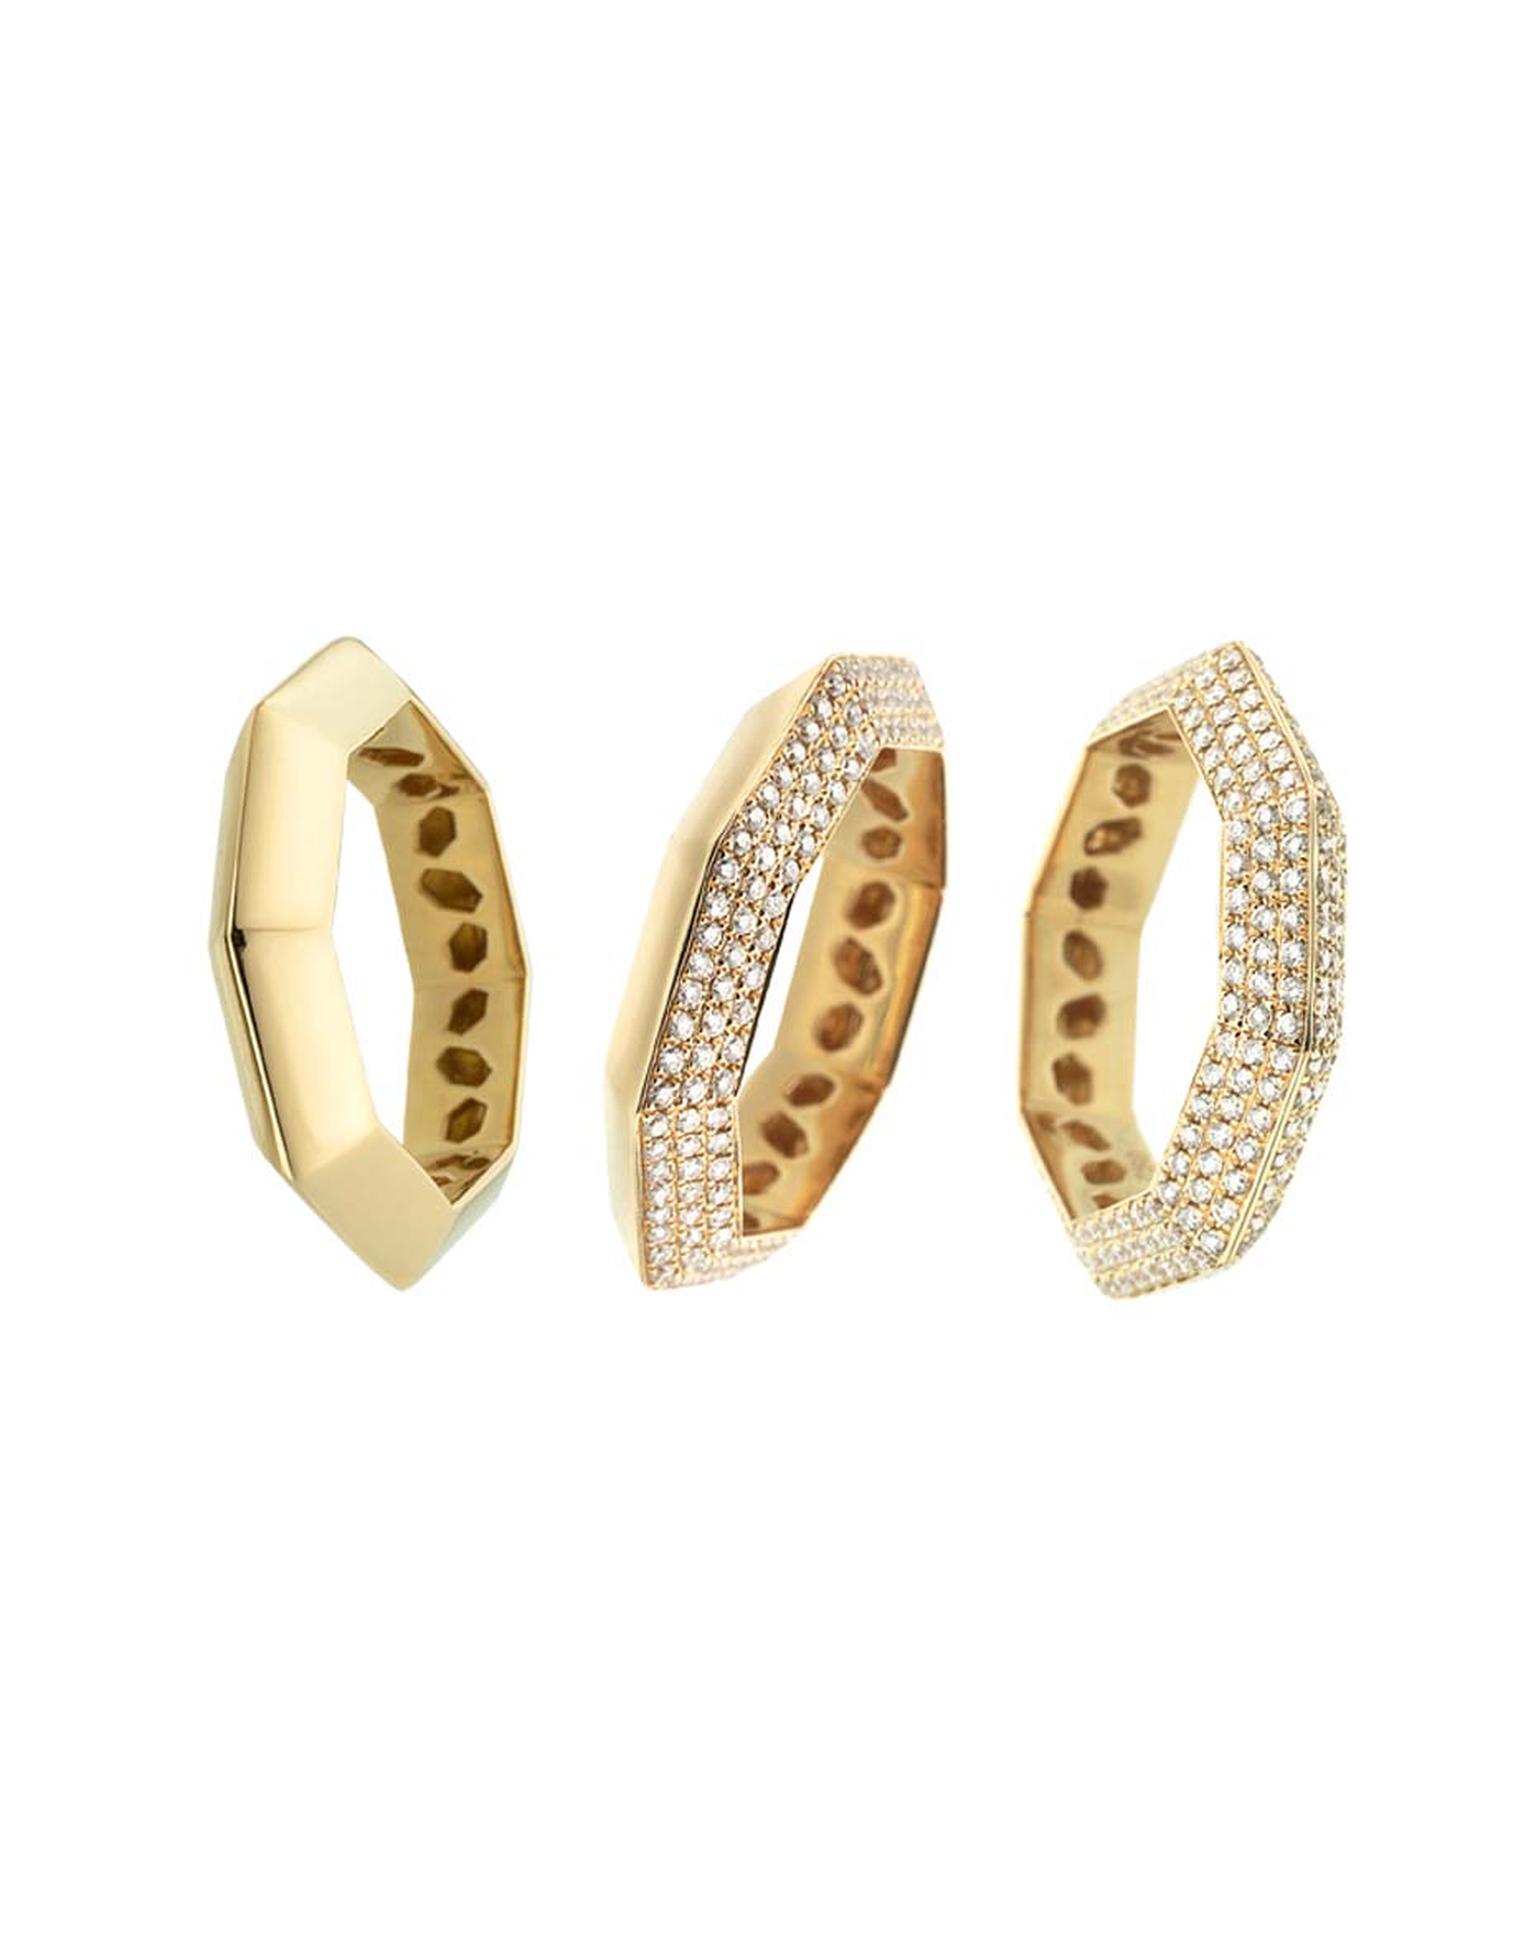 Octium Stacks and Facets yellow gold and diamond rings.